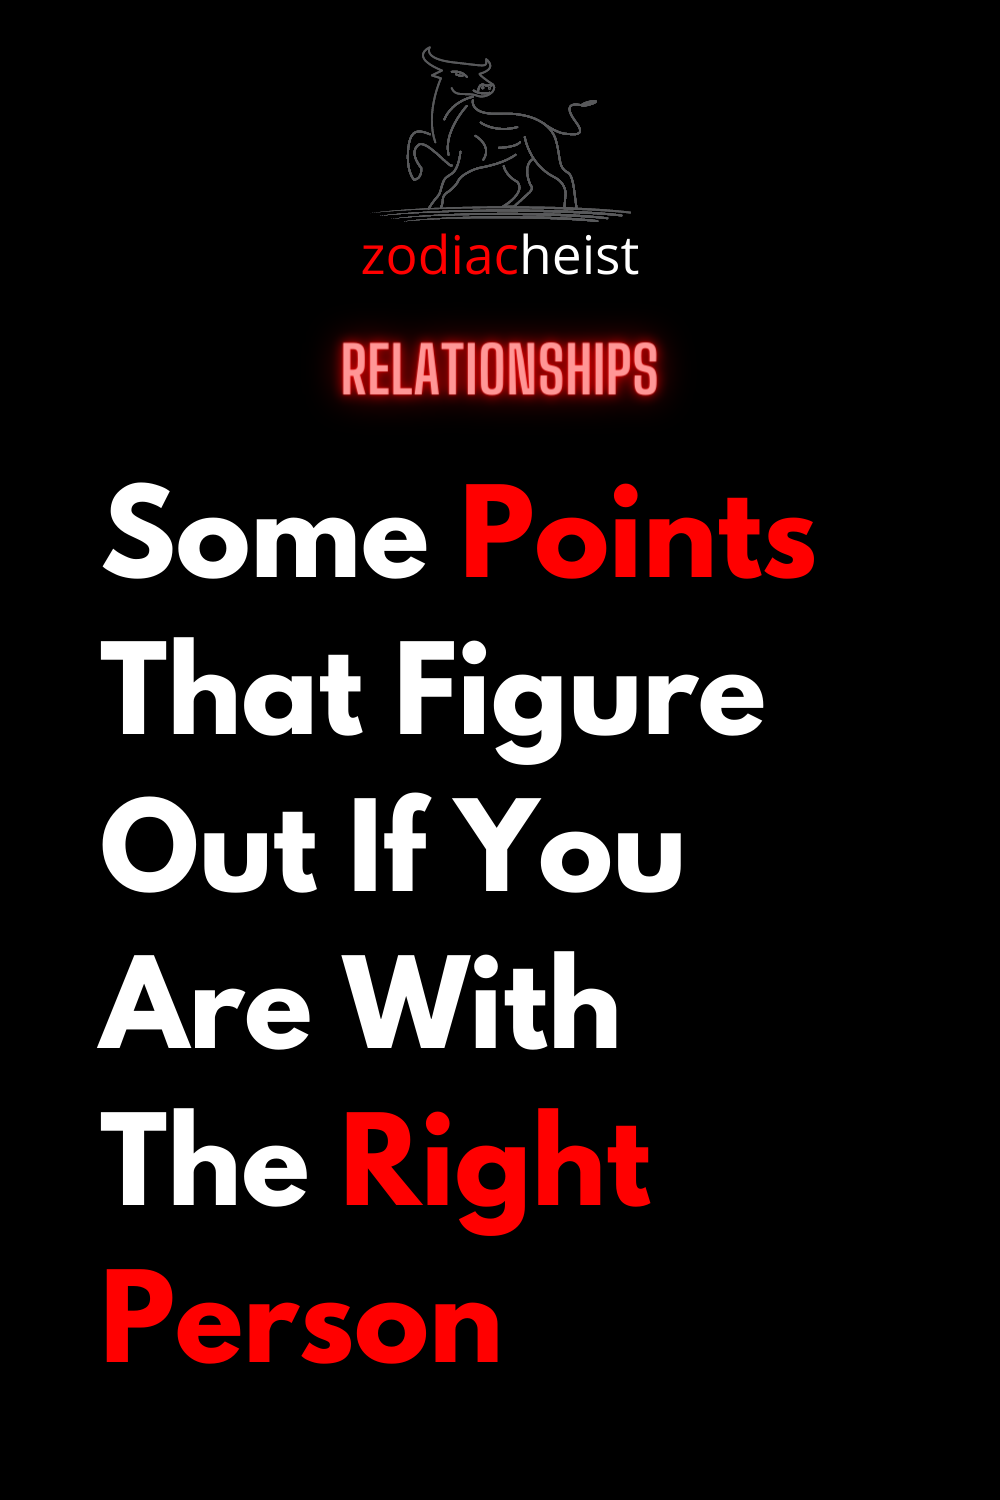 Some Points That Figure Out If You Are With The Right Person